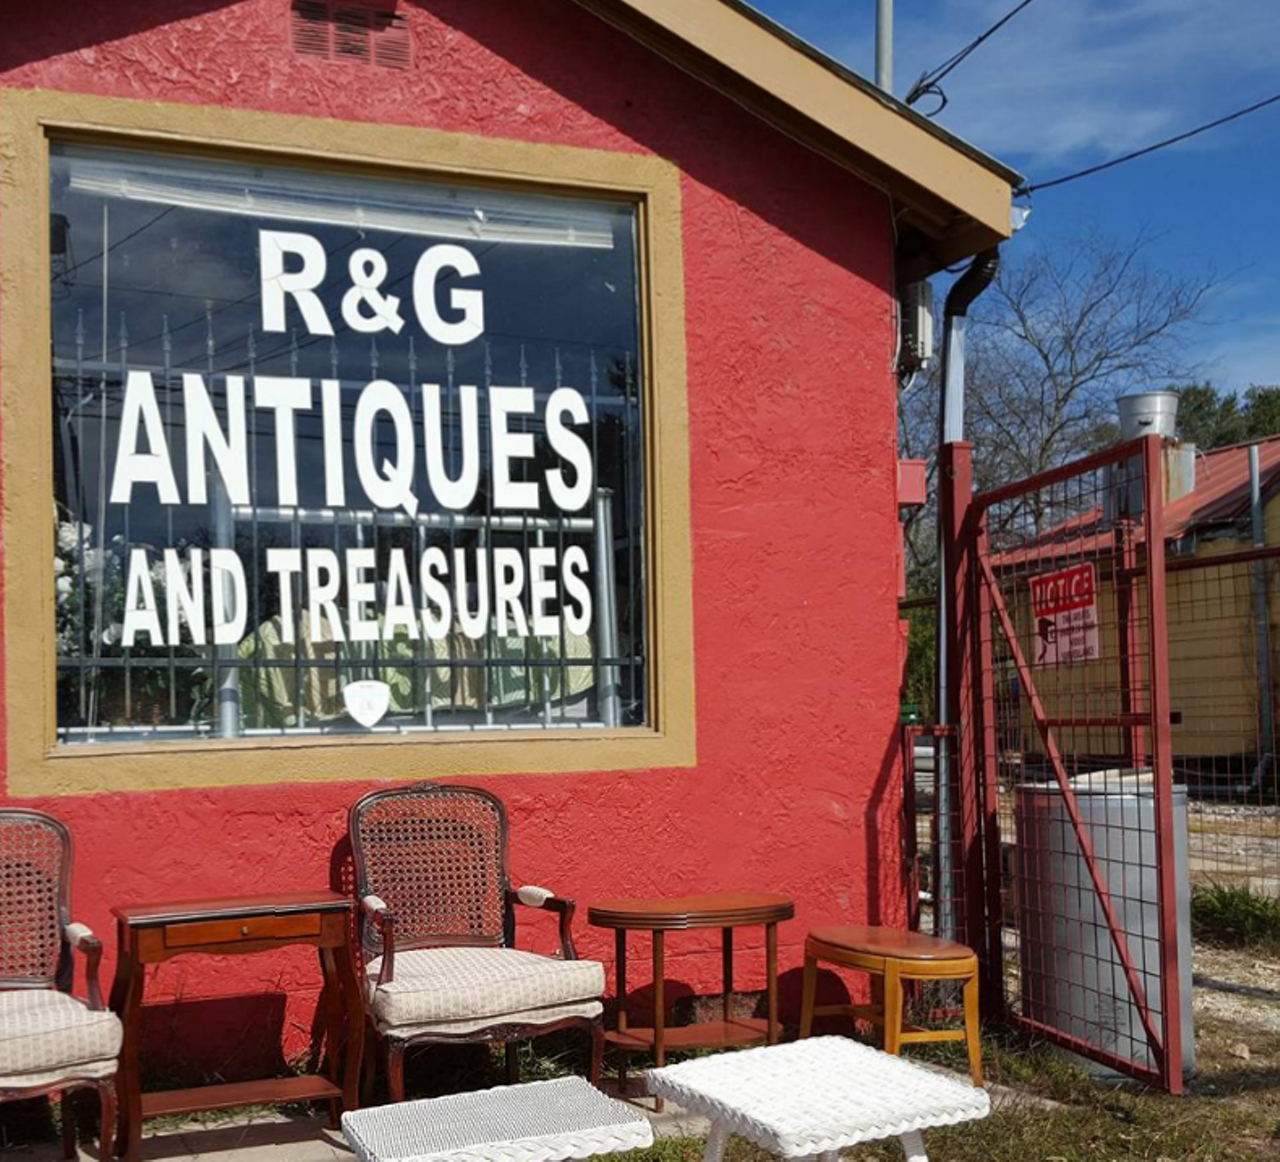  R&G Antiques & Treasures
627 W Hildebrand Ave, (210) 320-9315
A great spot for antiques and collectibles, this eclectic store will have vintage lovers leaving happy. Antique jewelry and decor items along with jewelry can be found at this unique place.
Facebook/R&G Antiques & Treasures